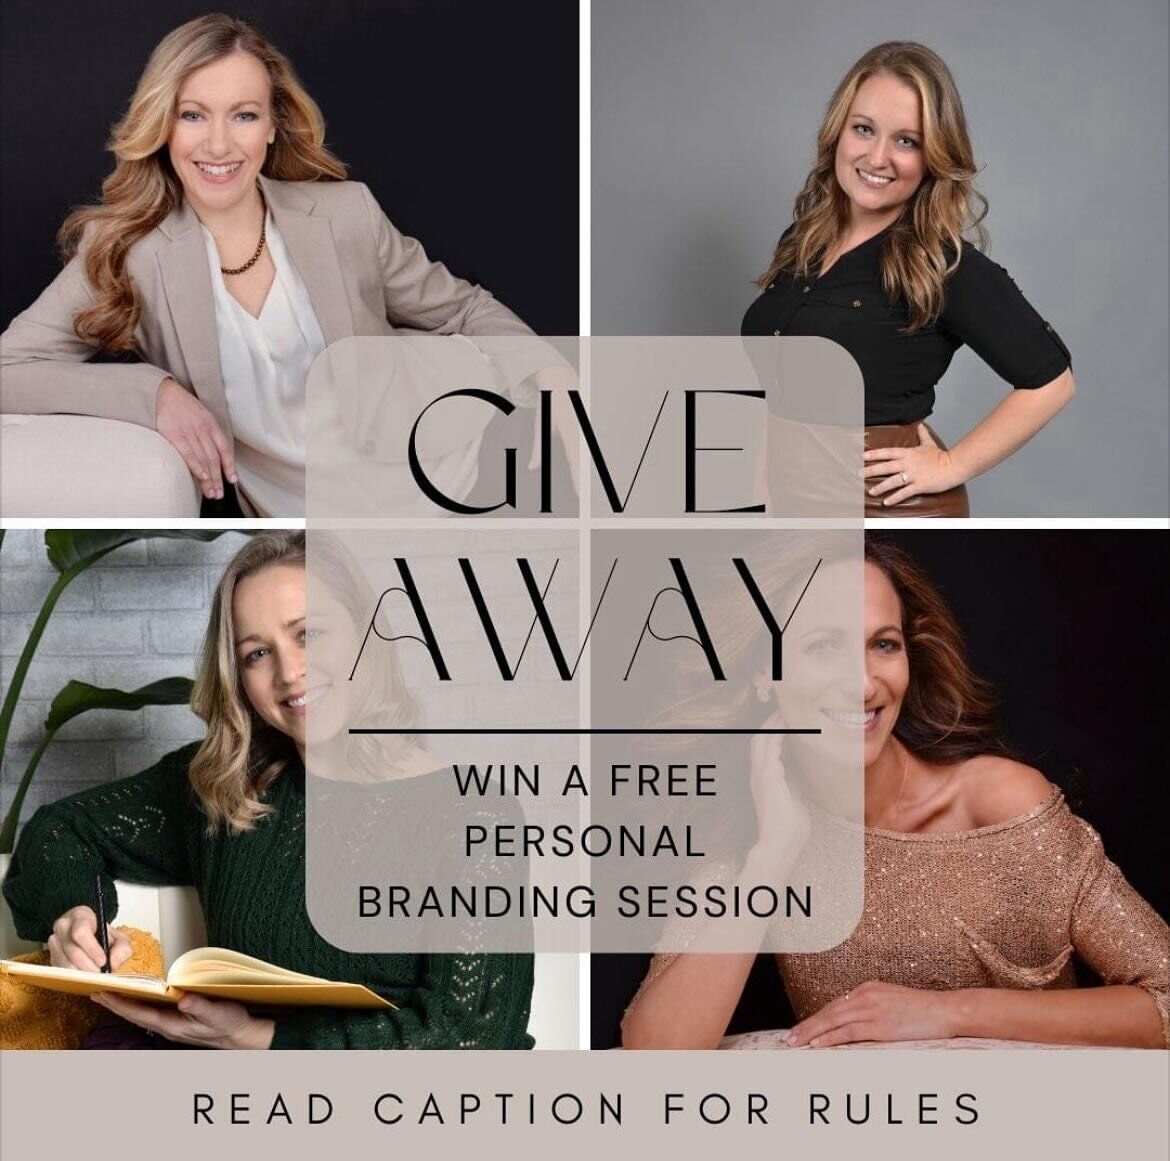 📣 GIVEAWAY TIME!!! 

In celebration of our new studio space, we are giving away a luxury personal branding portrait session to one lucky person! 

You may bring up to TWO of your best bossbabe friends to join in on the fun. 🥂

Here&rsquo;s how to e